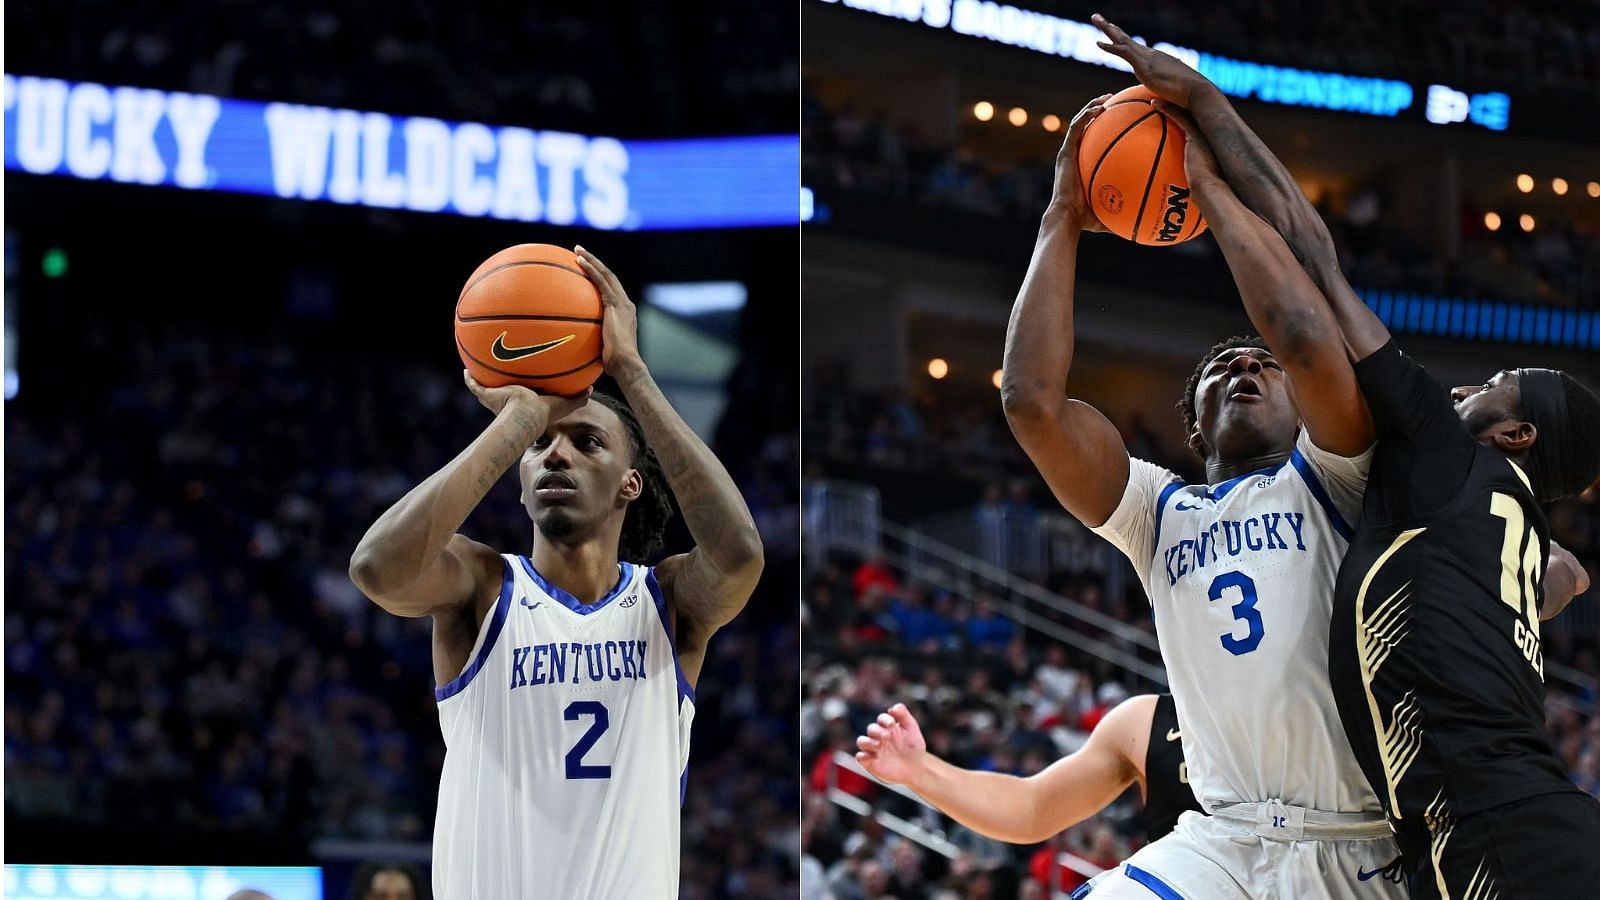 Aaron Bradshaw and Adou Thiero are two Kentucky players who have entered the transfer portal and NBA Draft.